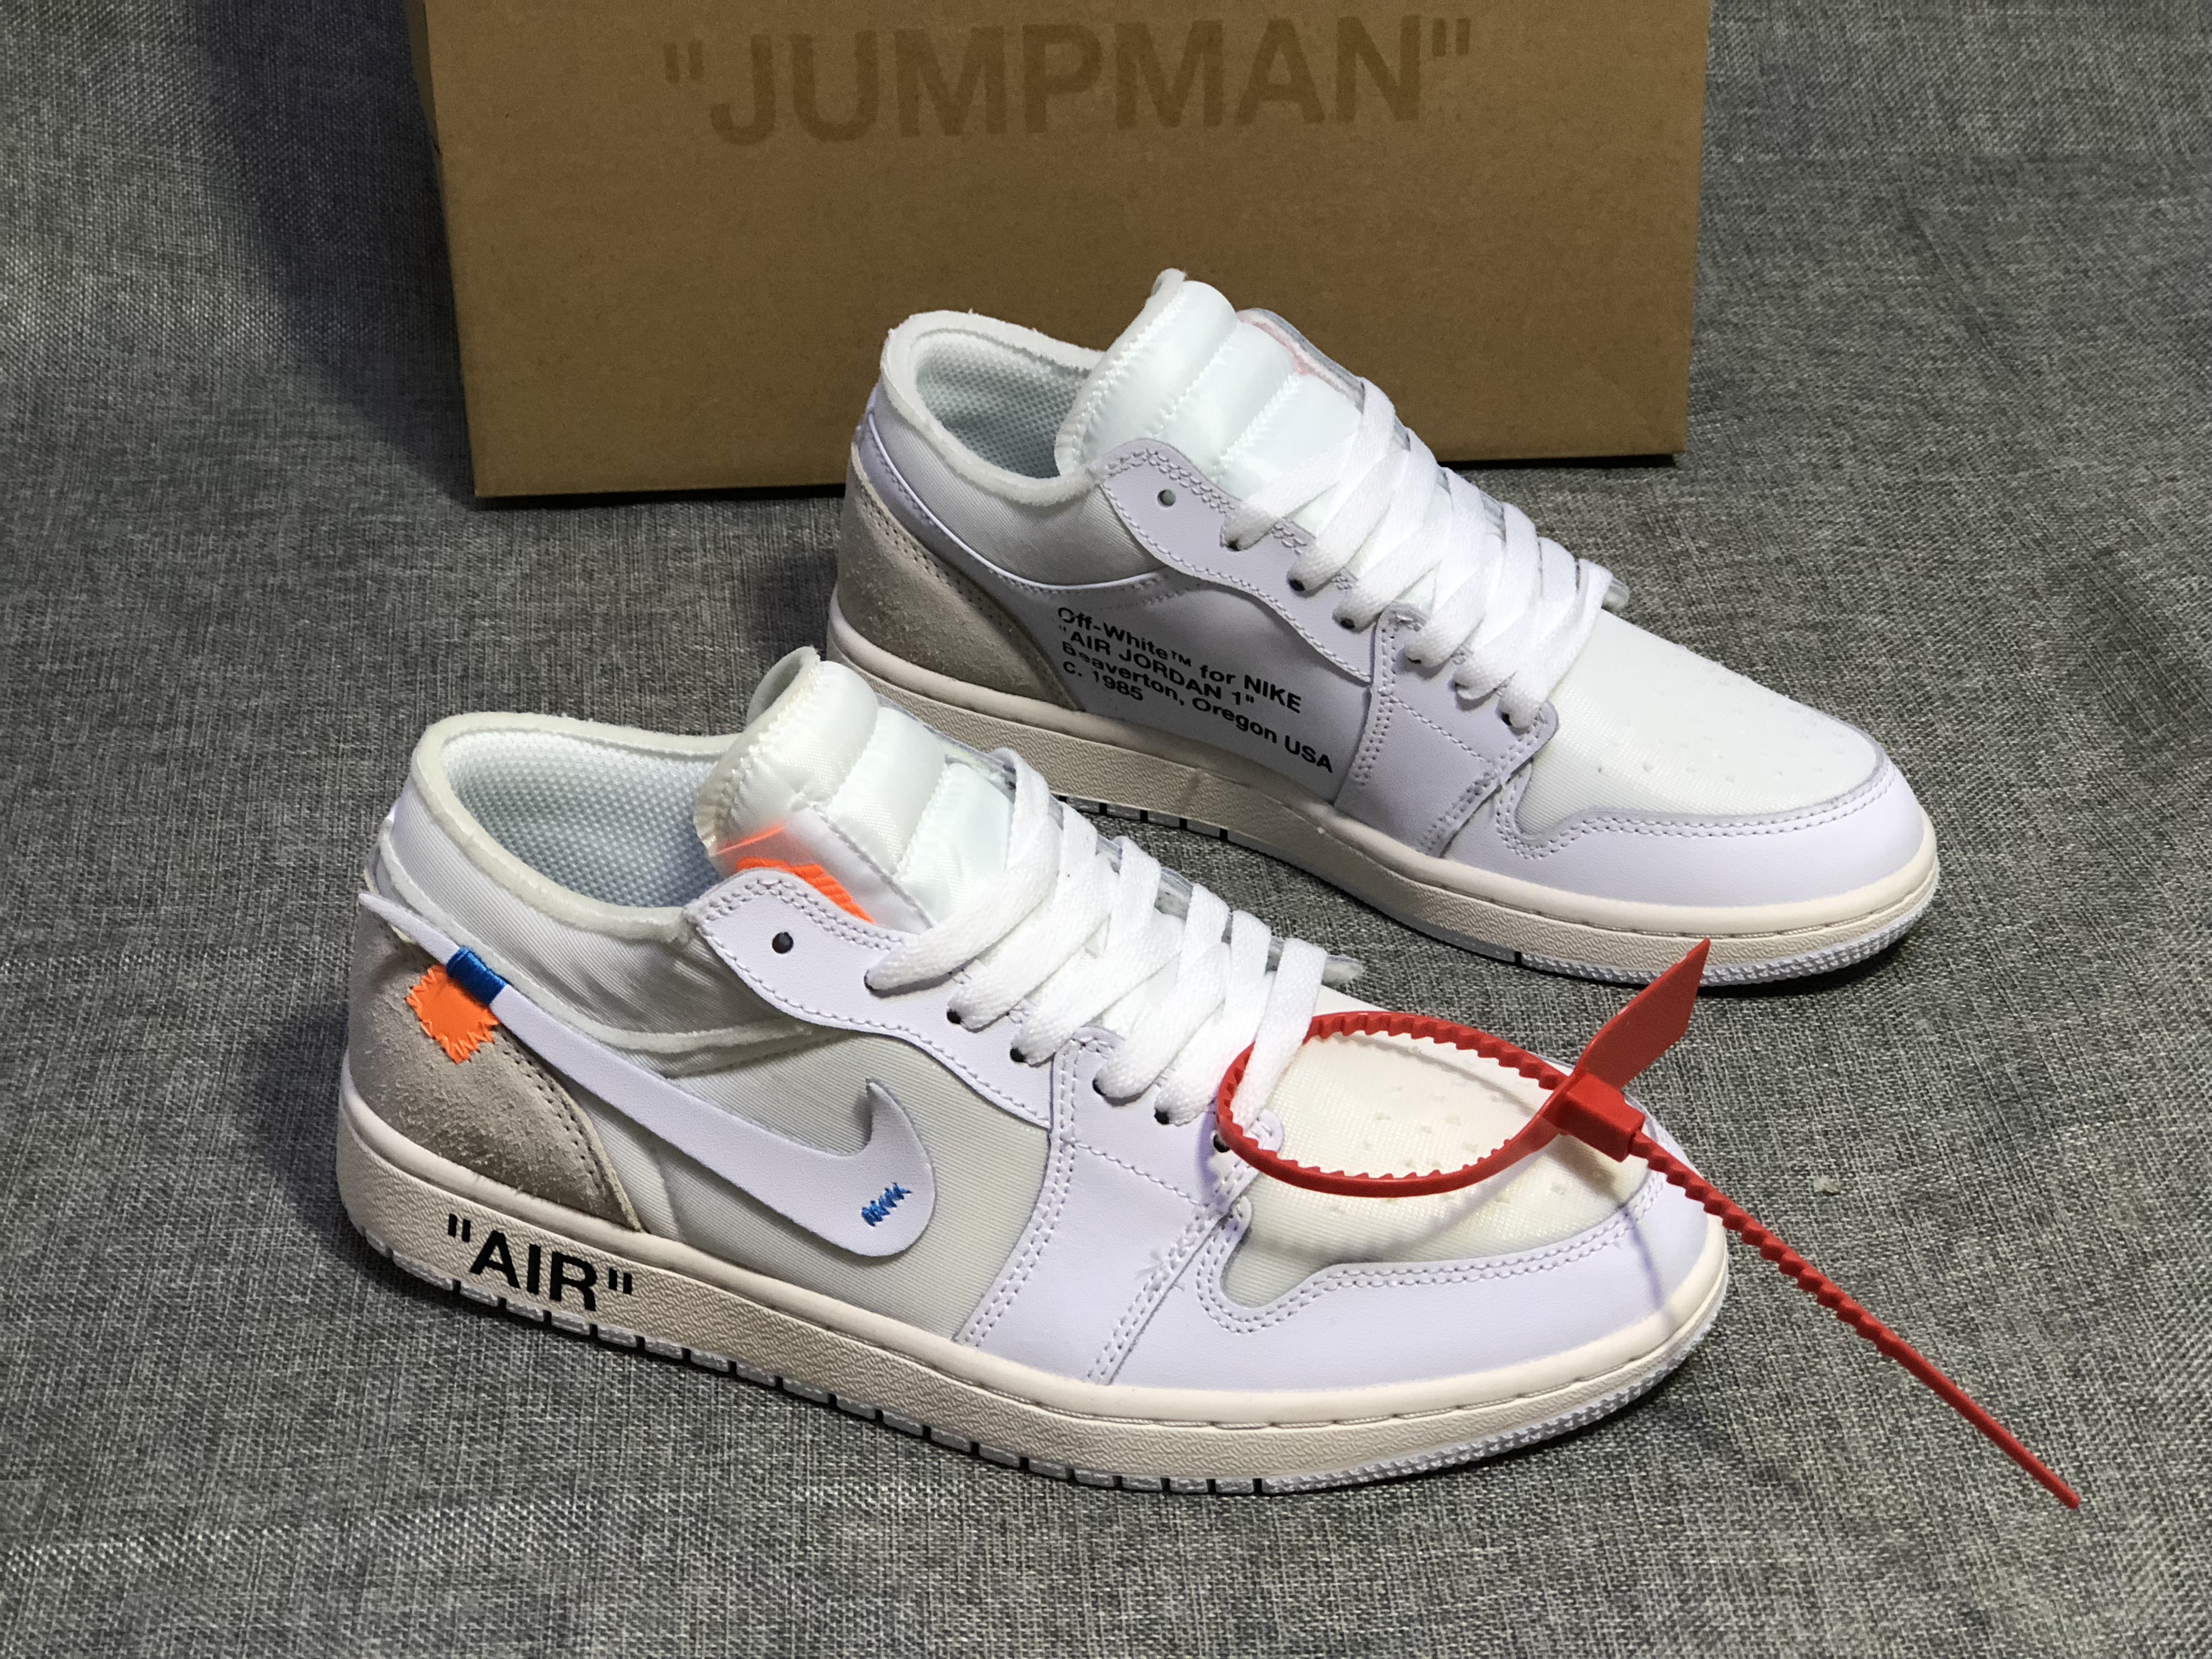 Air Jordan 1 Low x Off-white White Lover Shoes